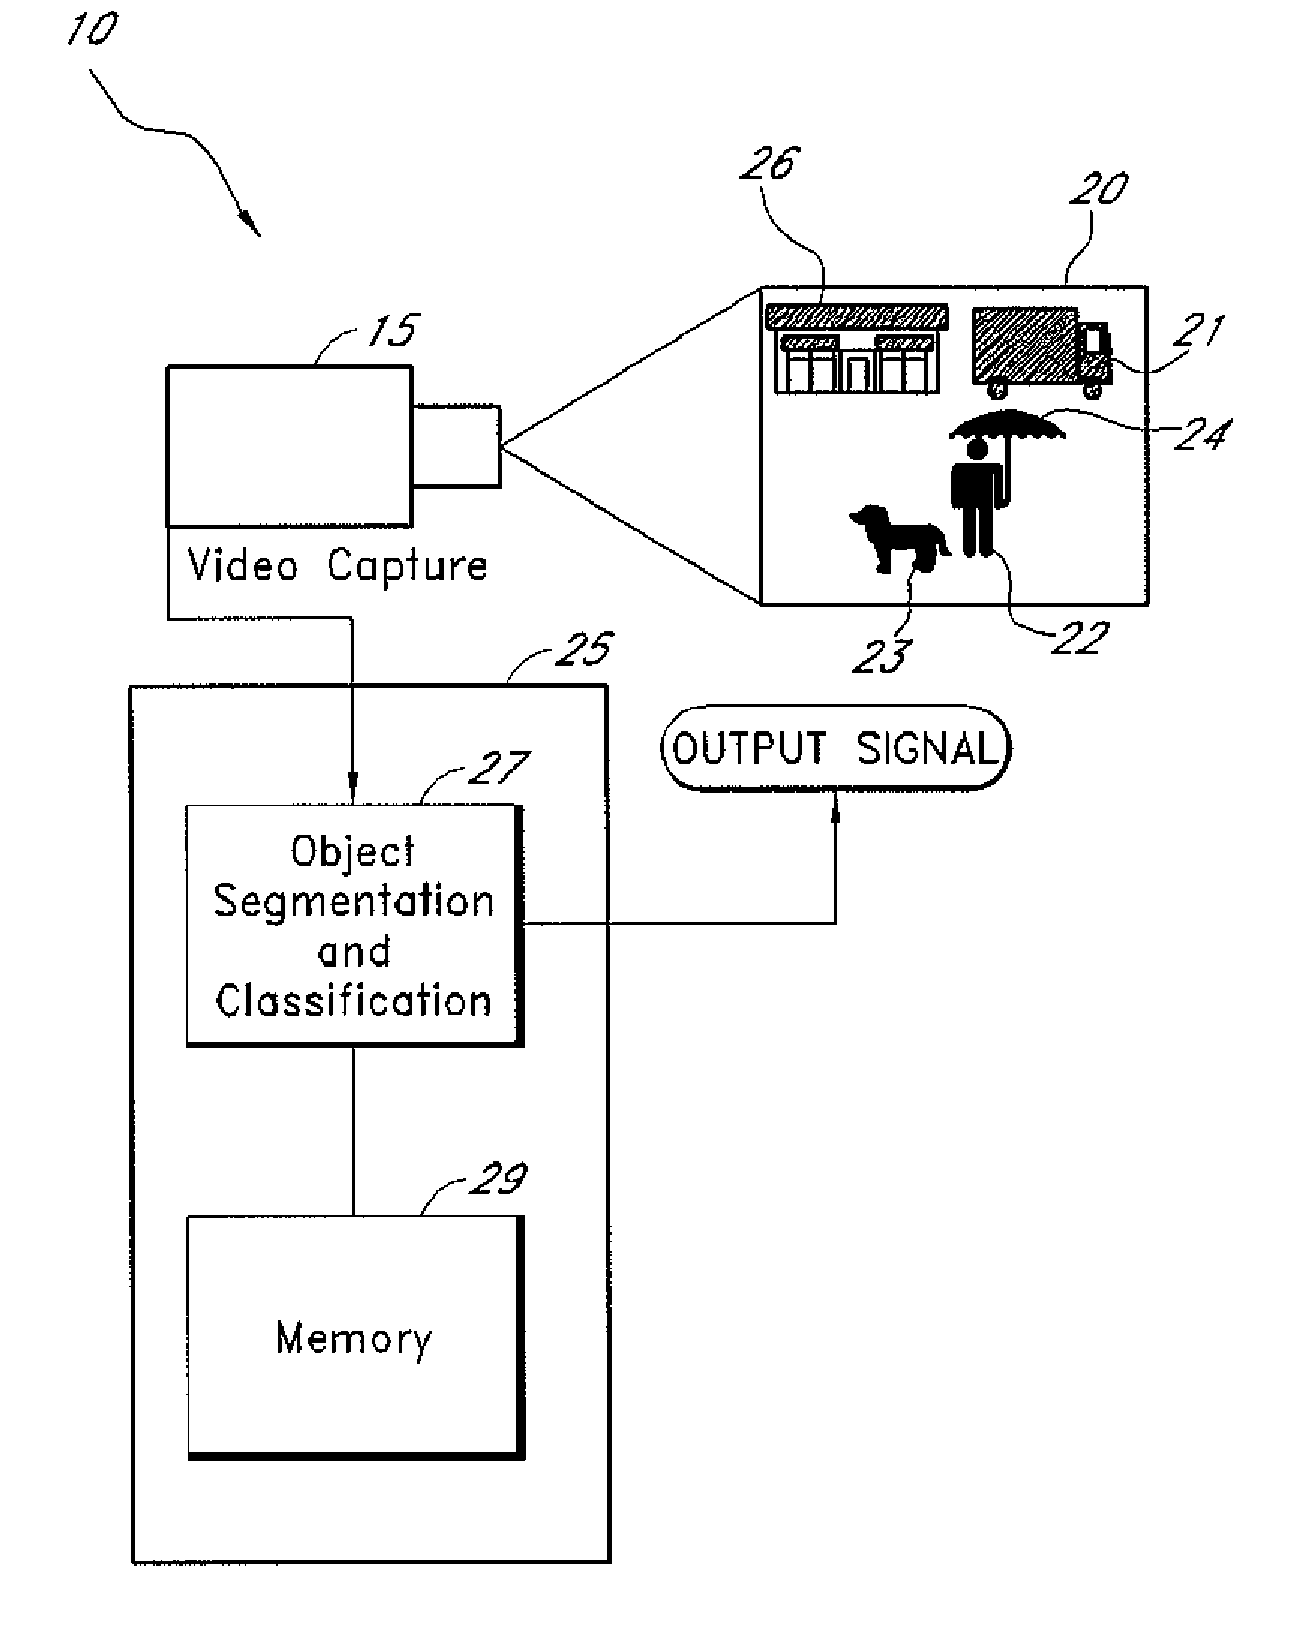 System and method for class-specific object segmentation of image data